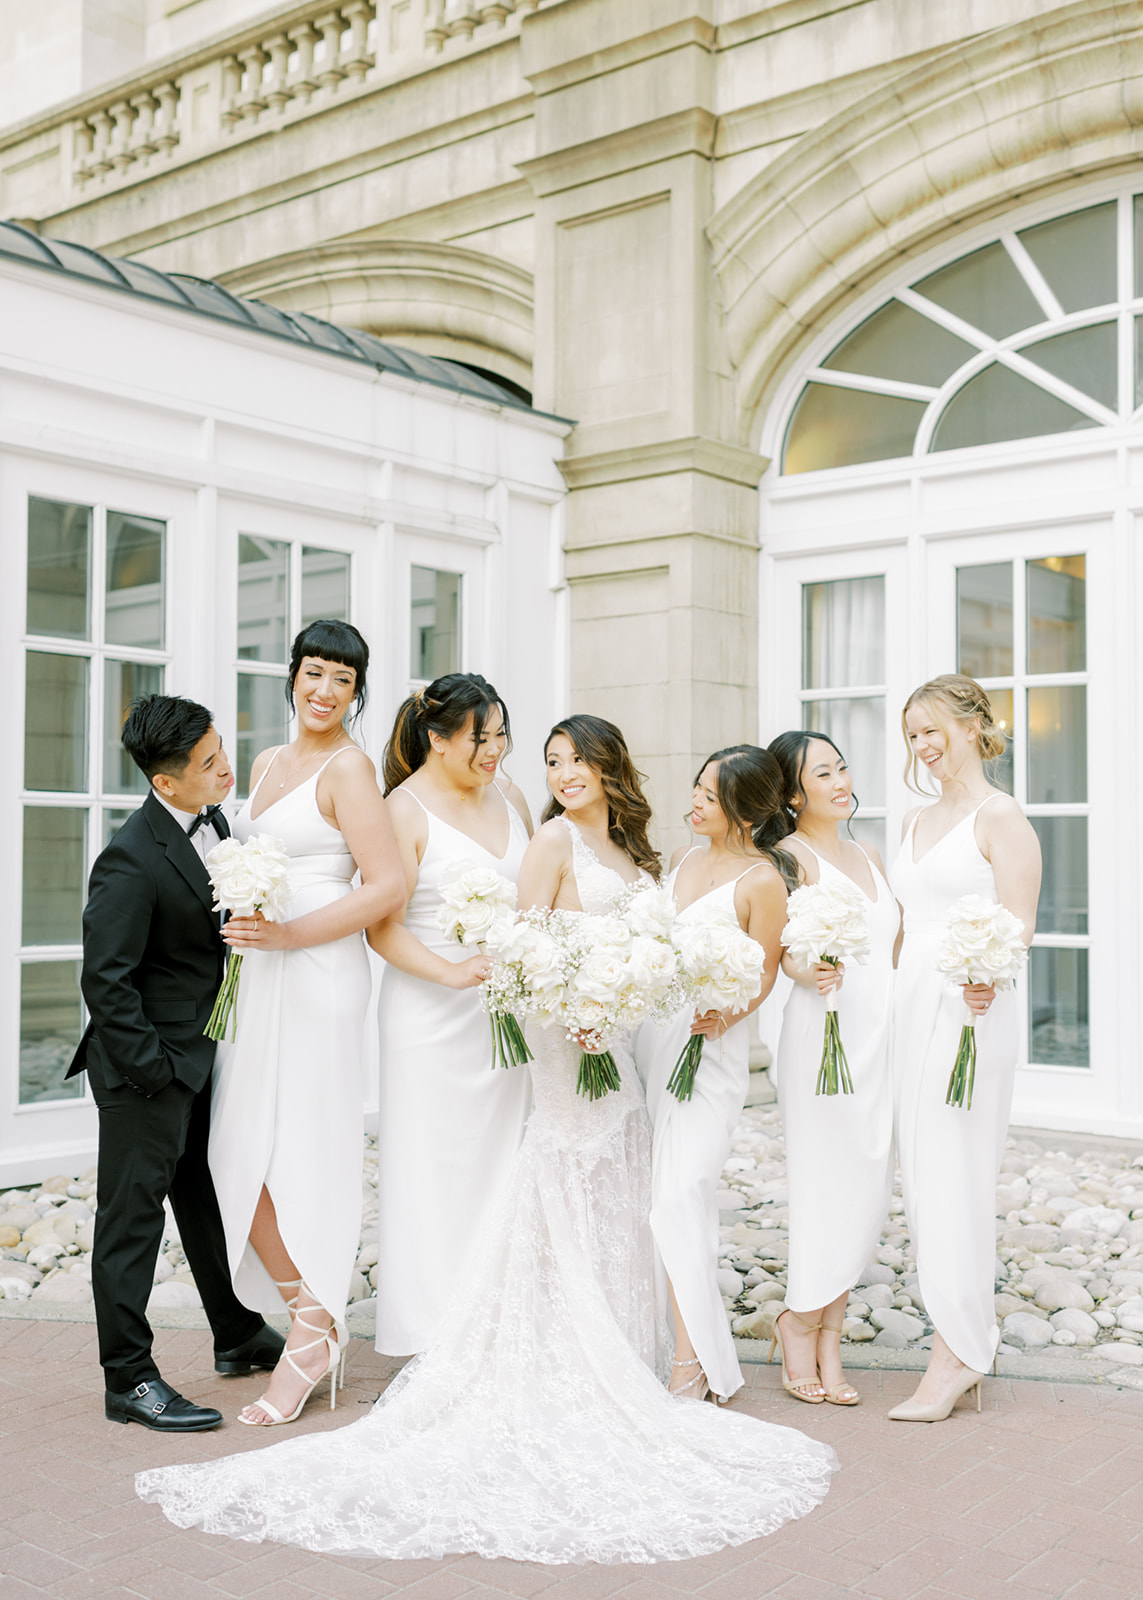 Bridal party in white, all white wedding inspiration